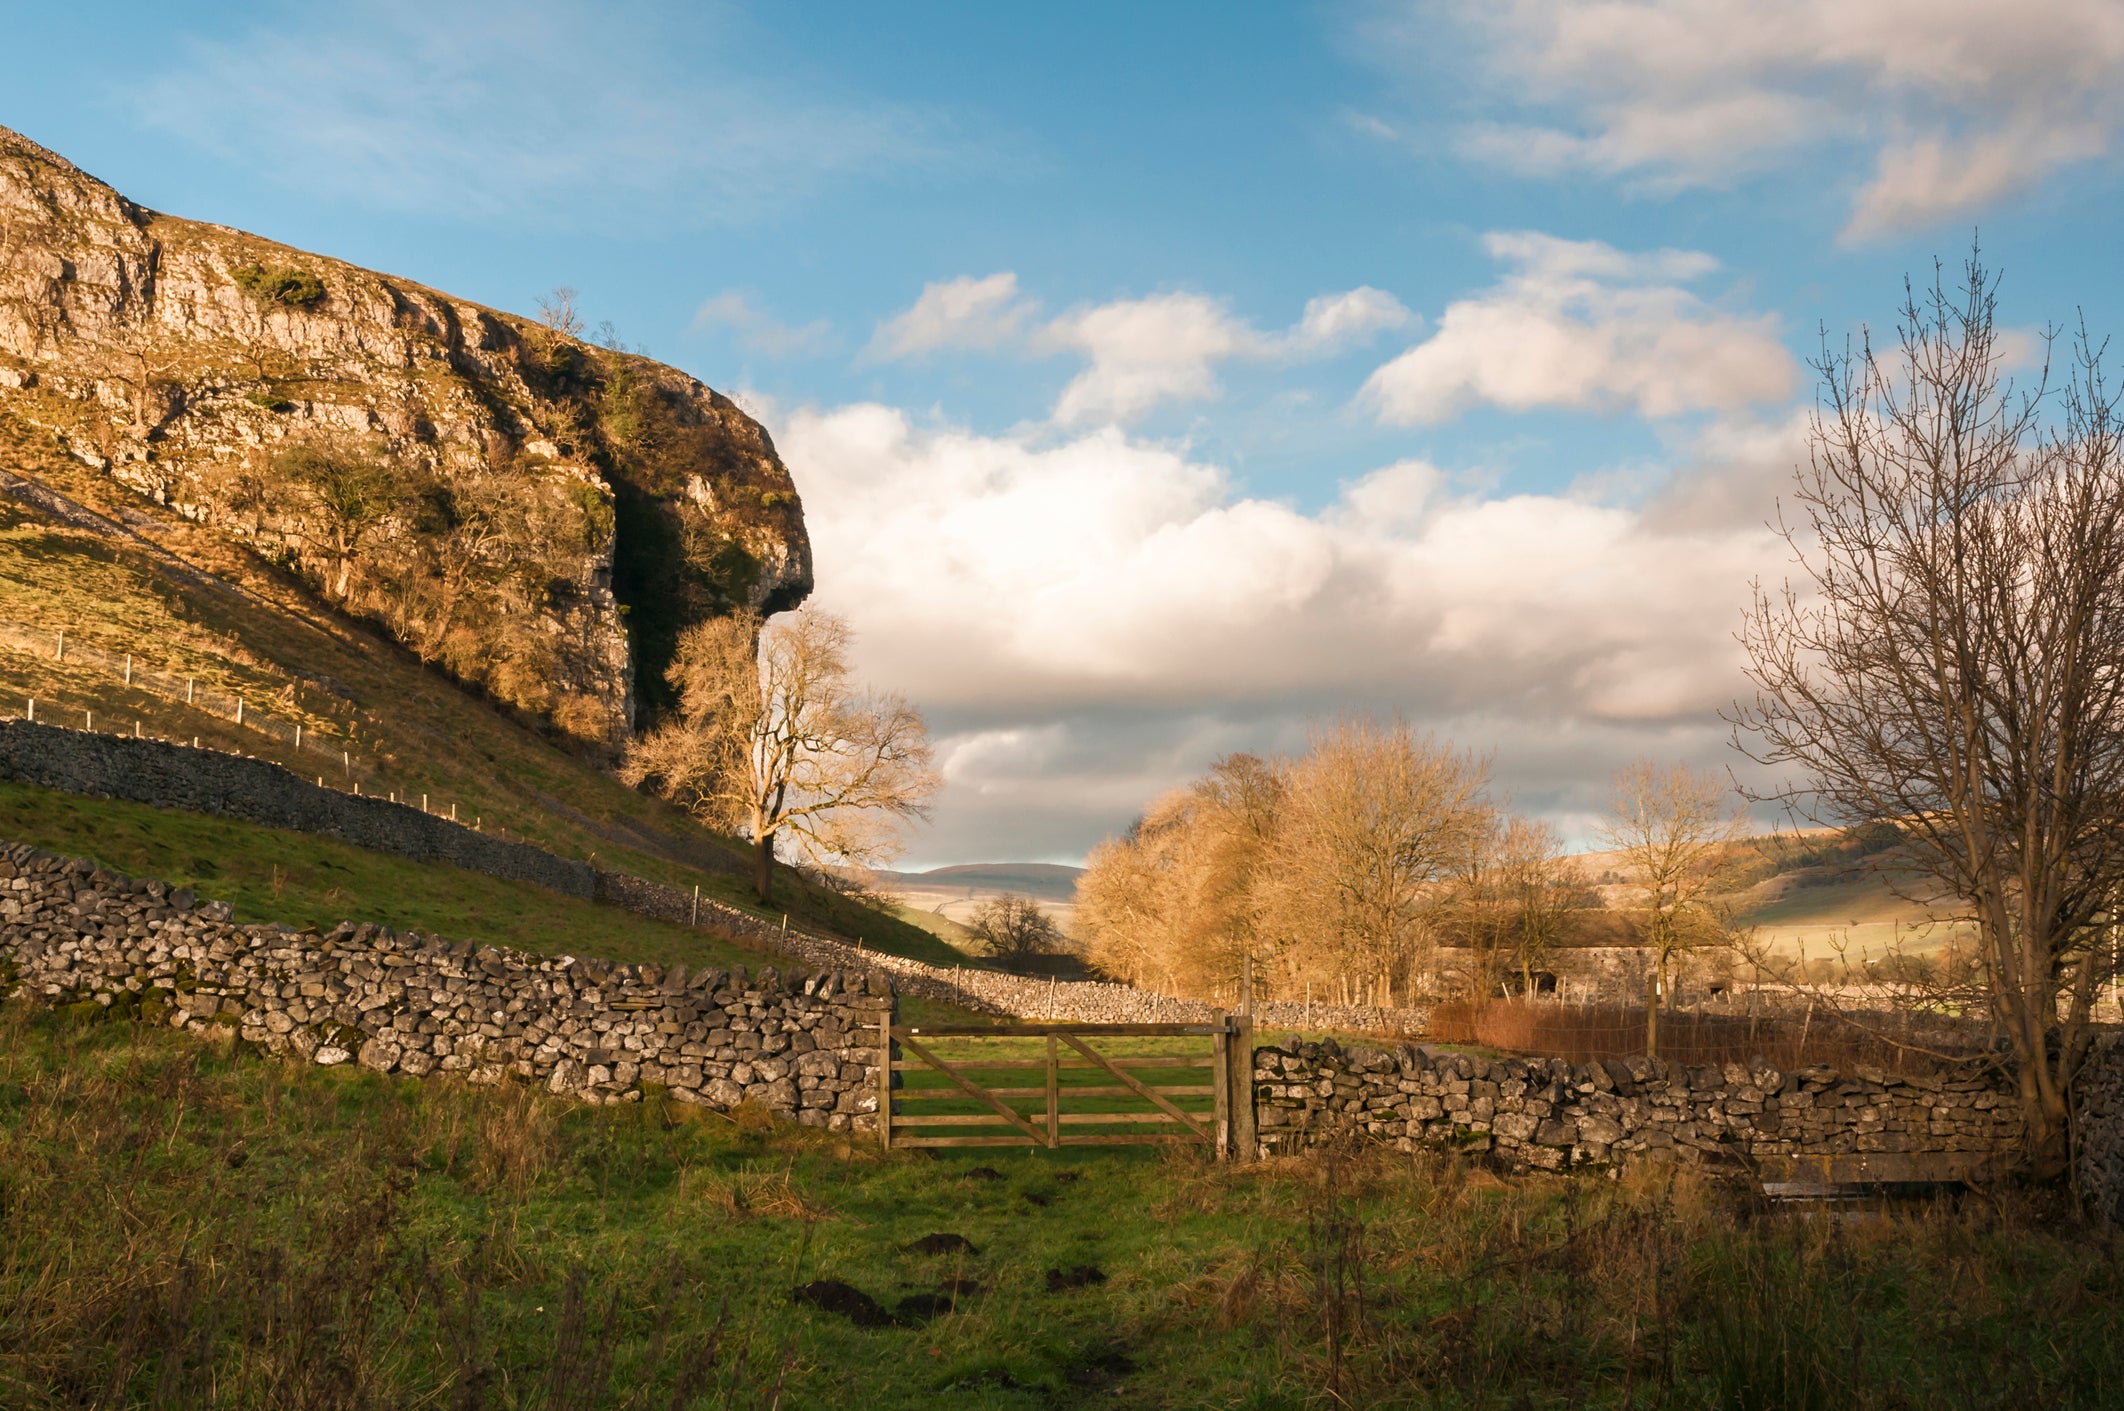 The crag contains several of the UK’s most extreme climbing routes